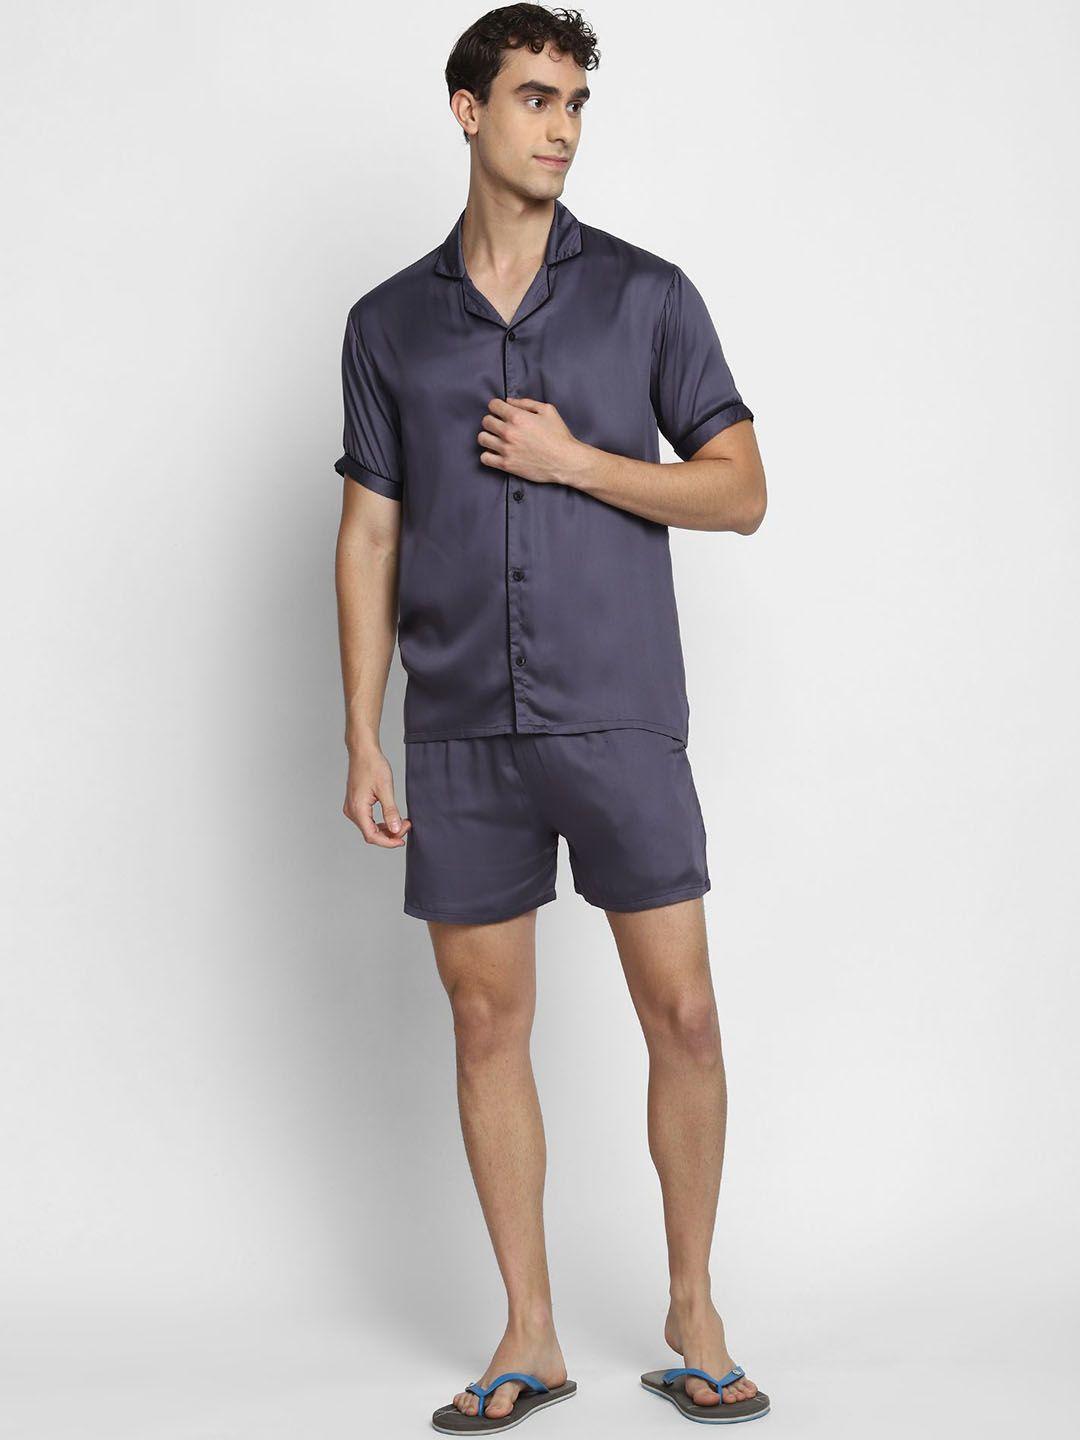 shopbloom men pure cotton spread collar shirt with shorts